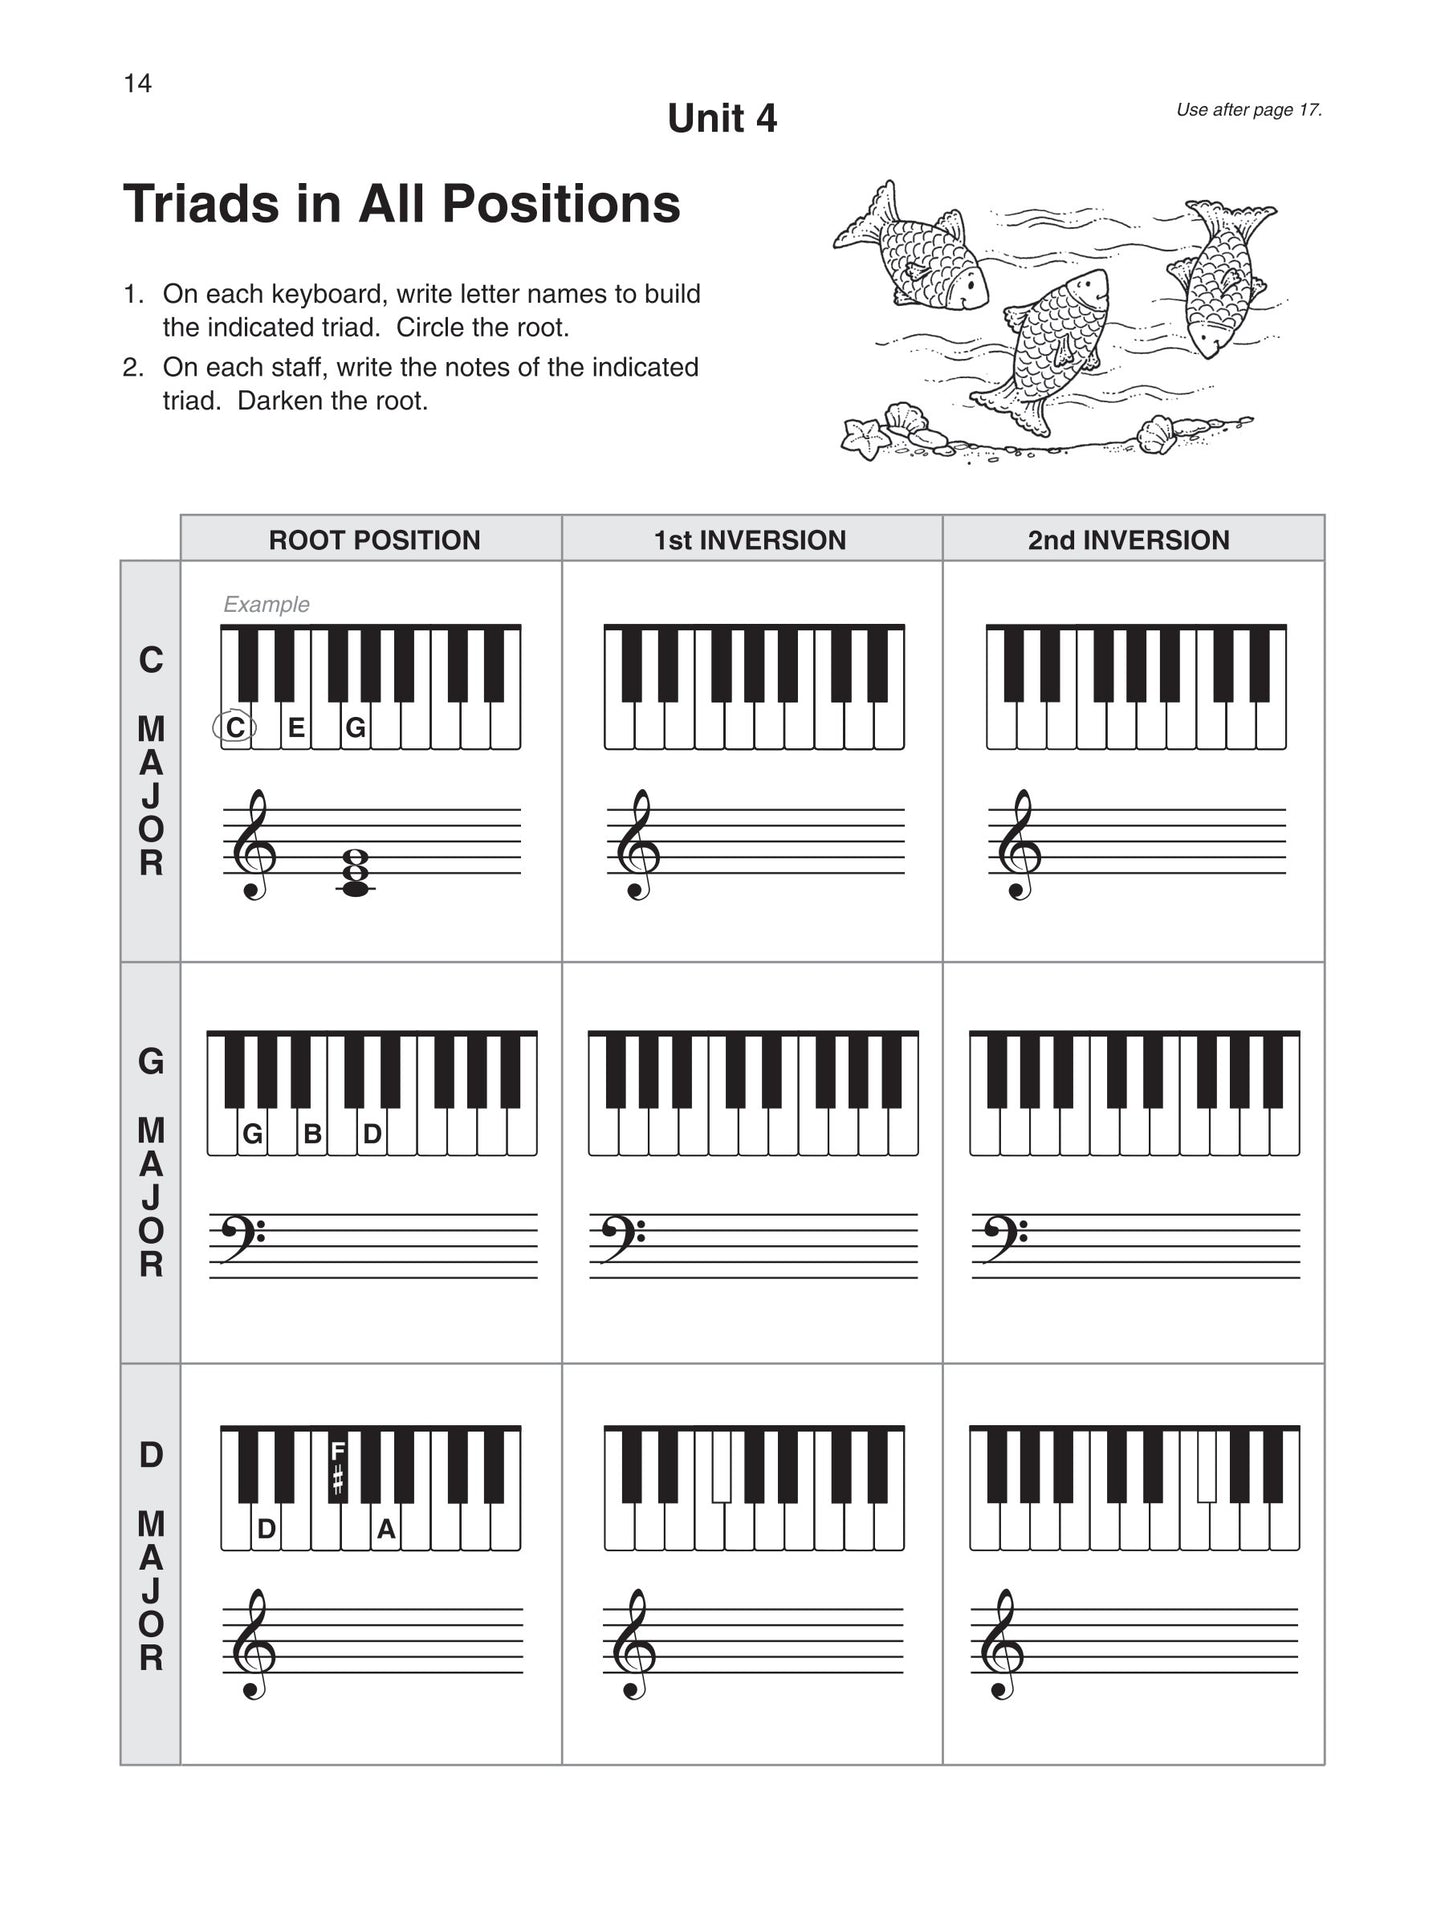 Alfred's Basic Piano Library - Musical Concepts Level 4 Book